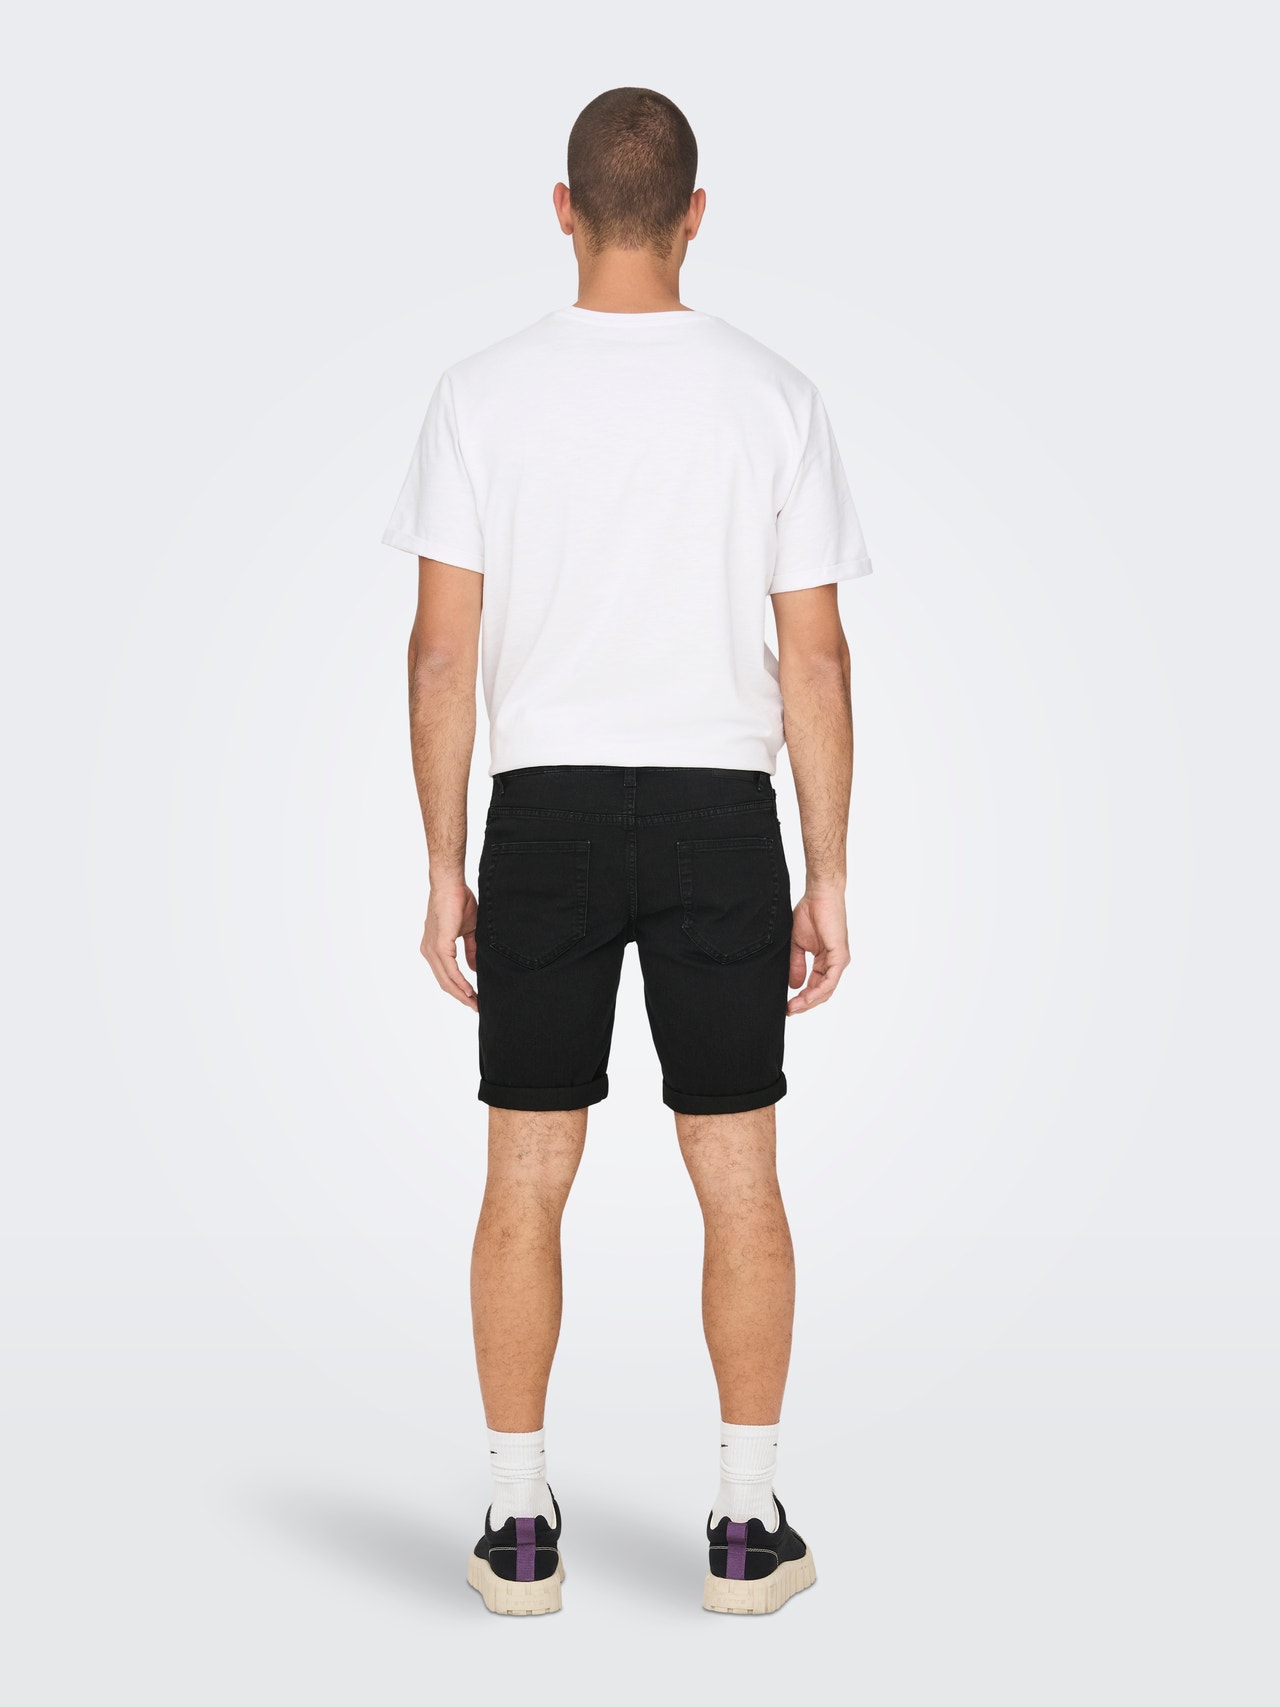 ONLY & SONS Normal geschnitten Mittlere Taille Shorts -Washed Black - 22026239